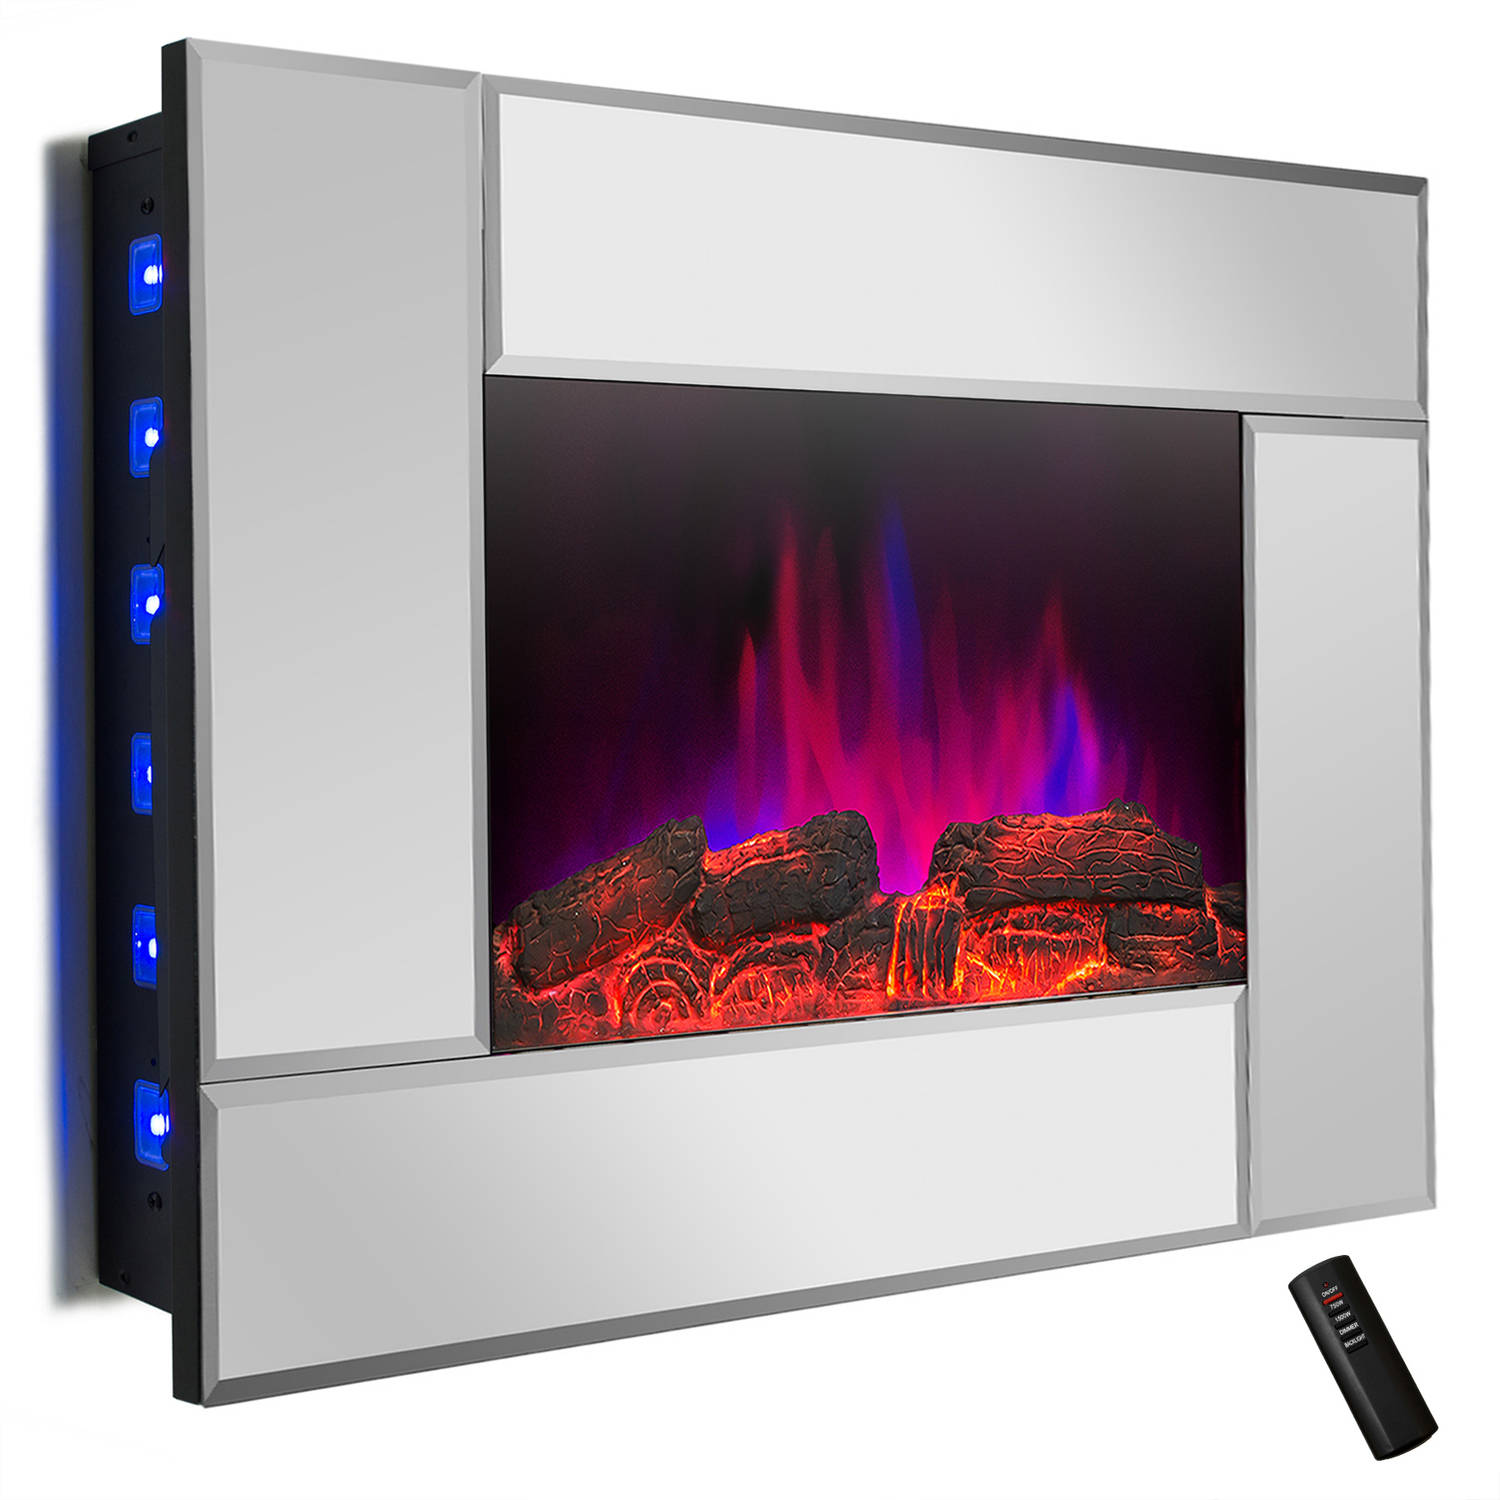 AKDY FP0050 36" 1500W Wall Mount Electric Fireplace Heater with Tempered Glass, Pebbles, Logs and Remote Control, Mirror - image 4 of 14